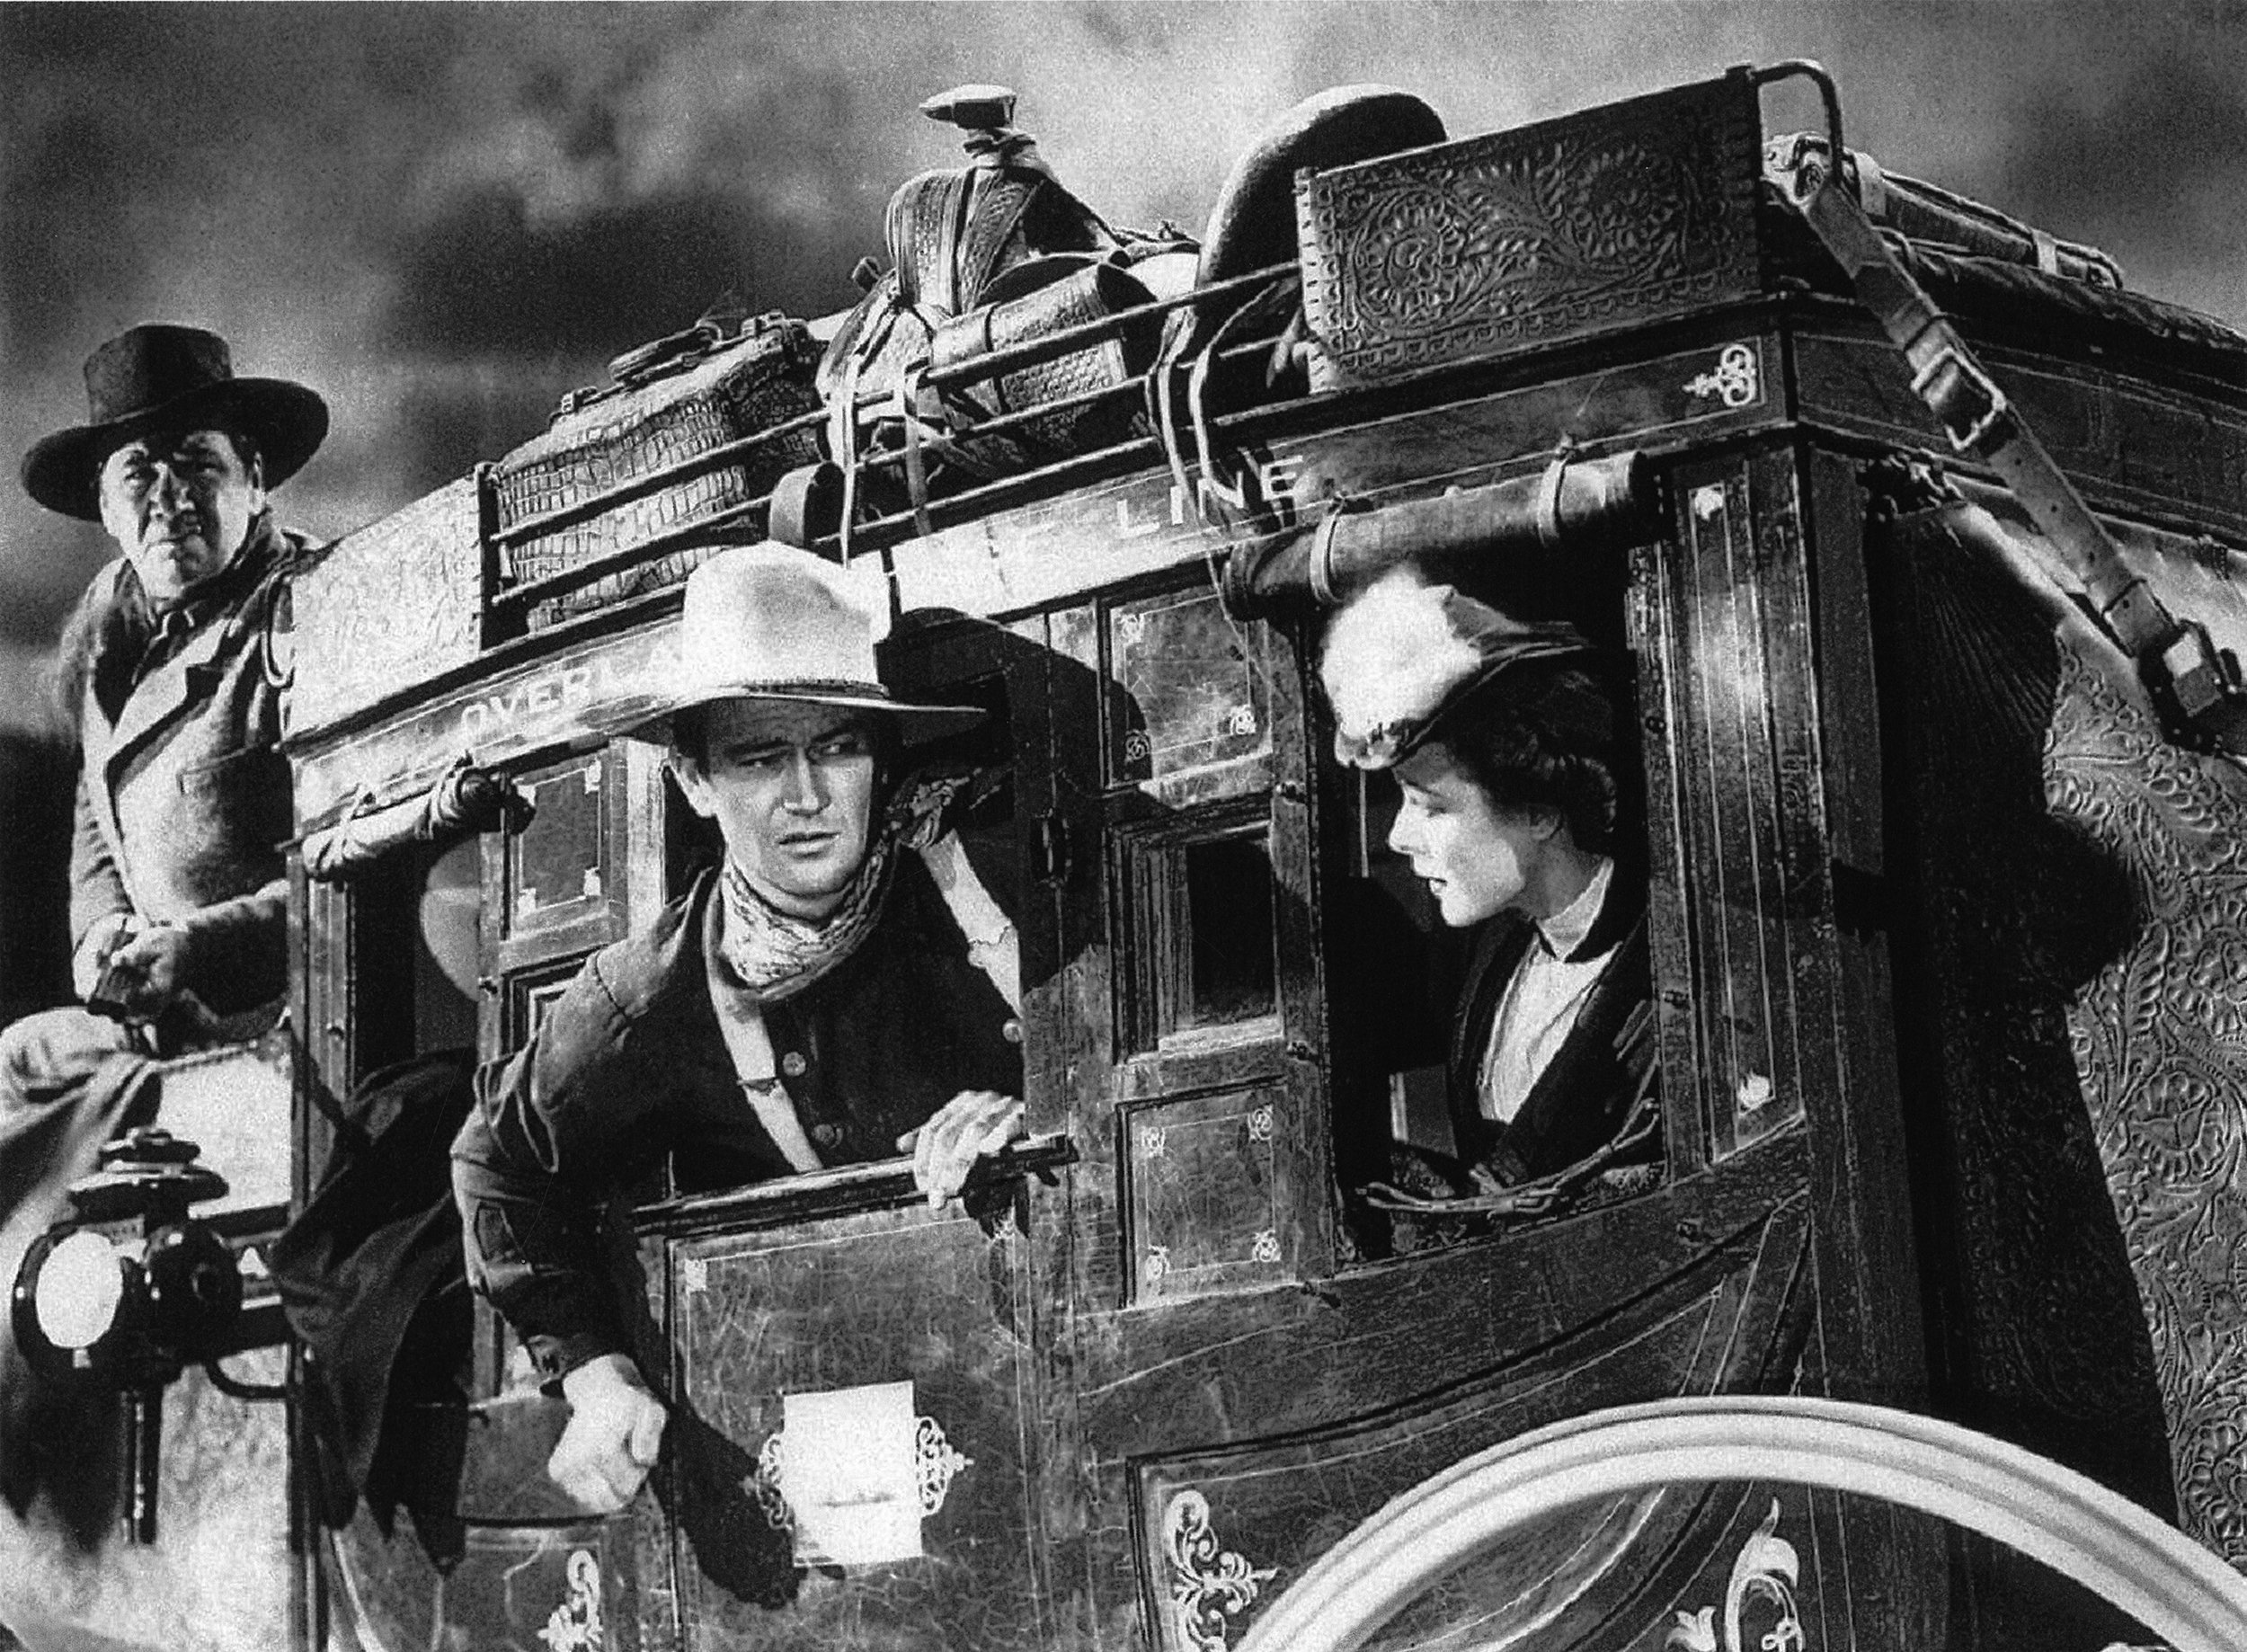 In 1939, John Wayne’s breakthrough role came when John Ford cast him as Ringo Kid in Stagecoach.